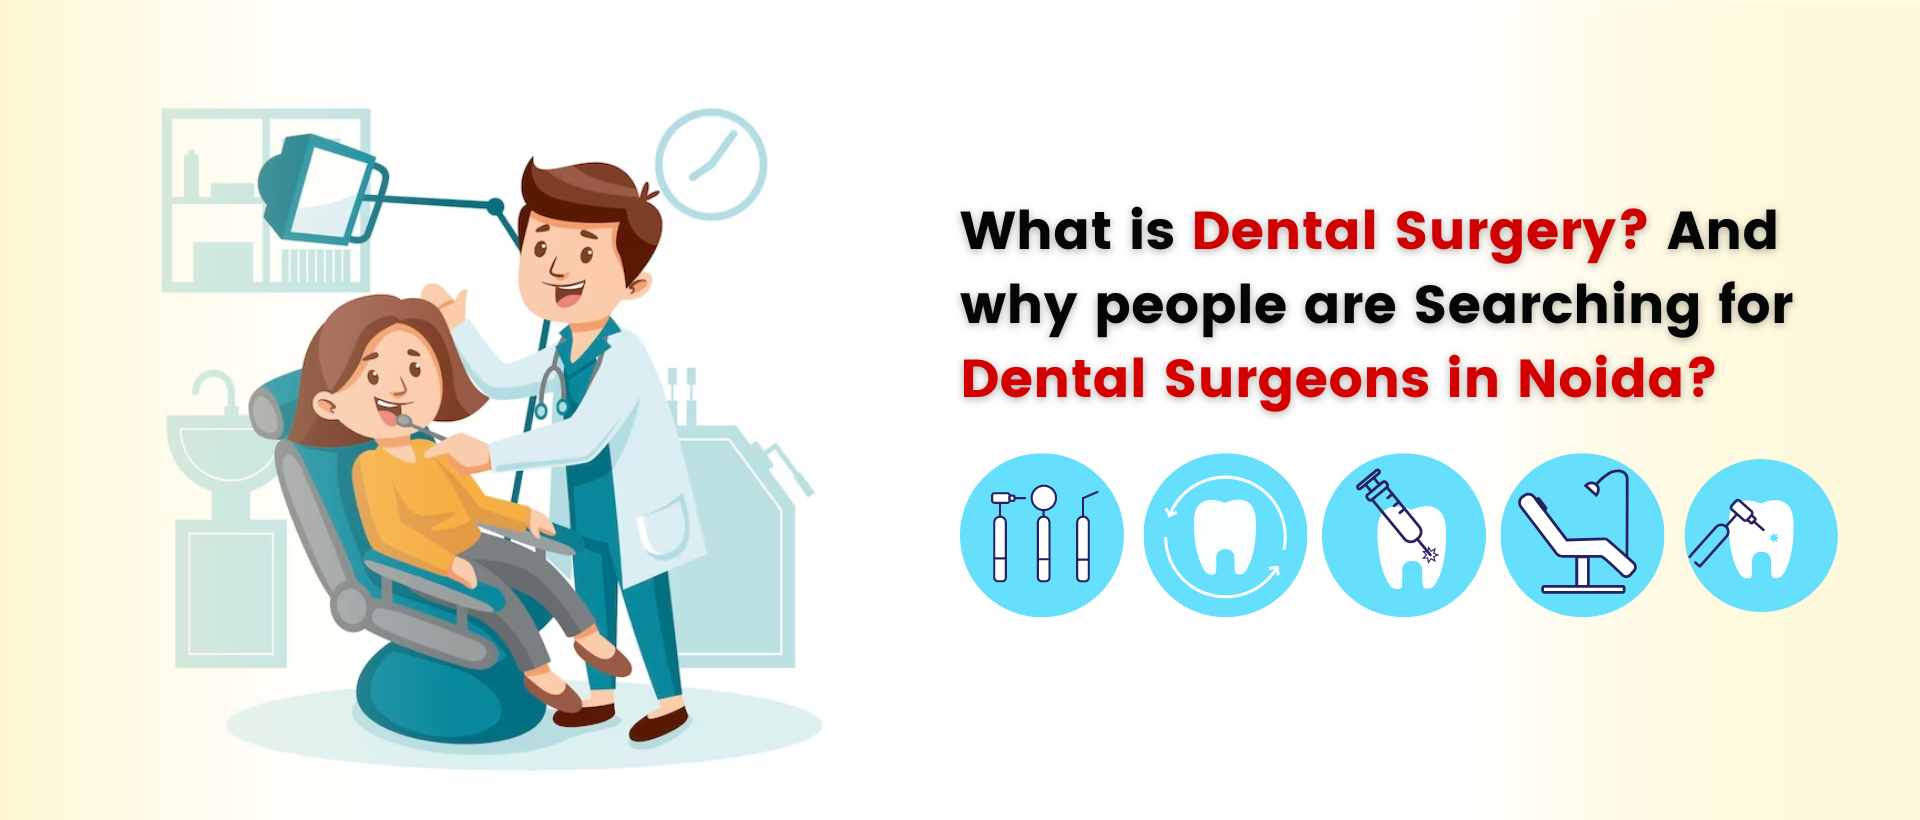 What is dental surgery? and why people are searching for dental surgeons in noida?